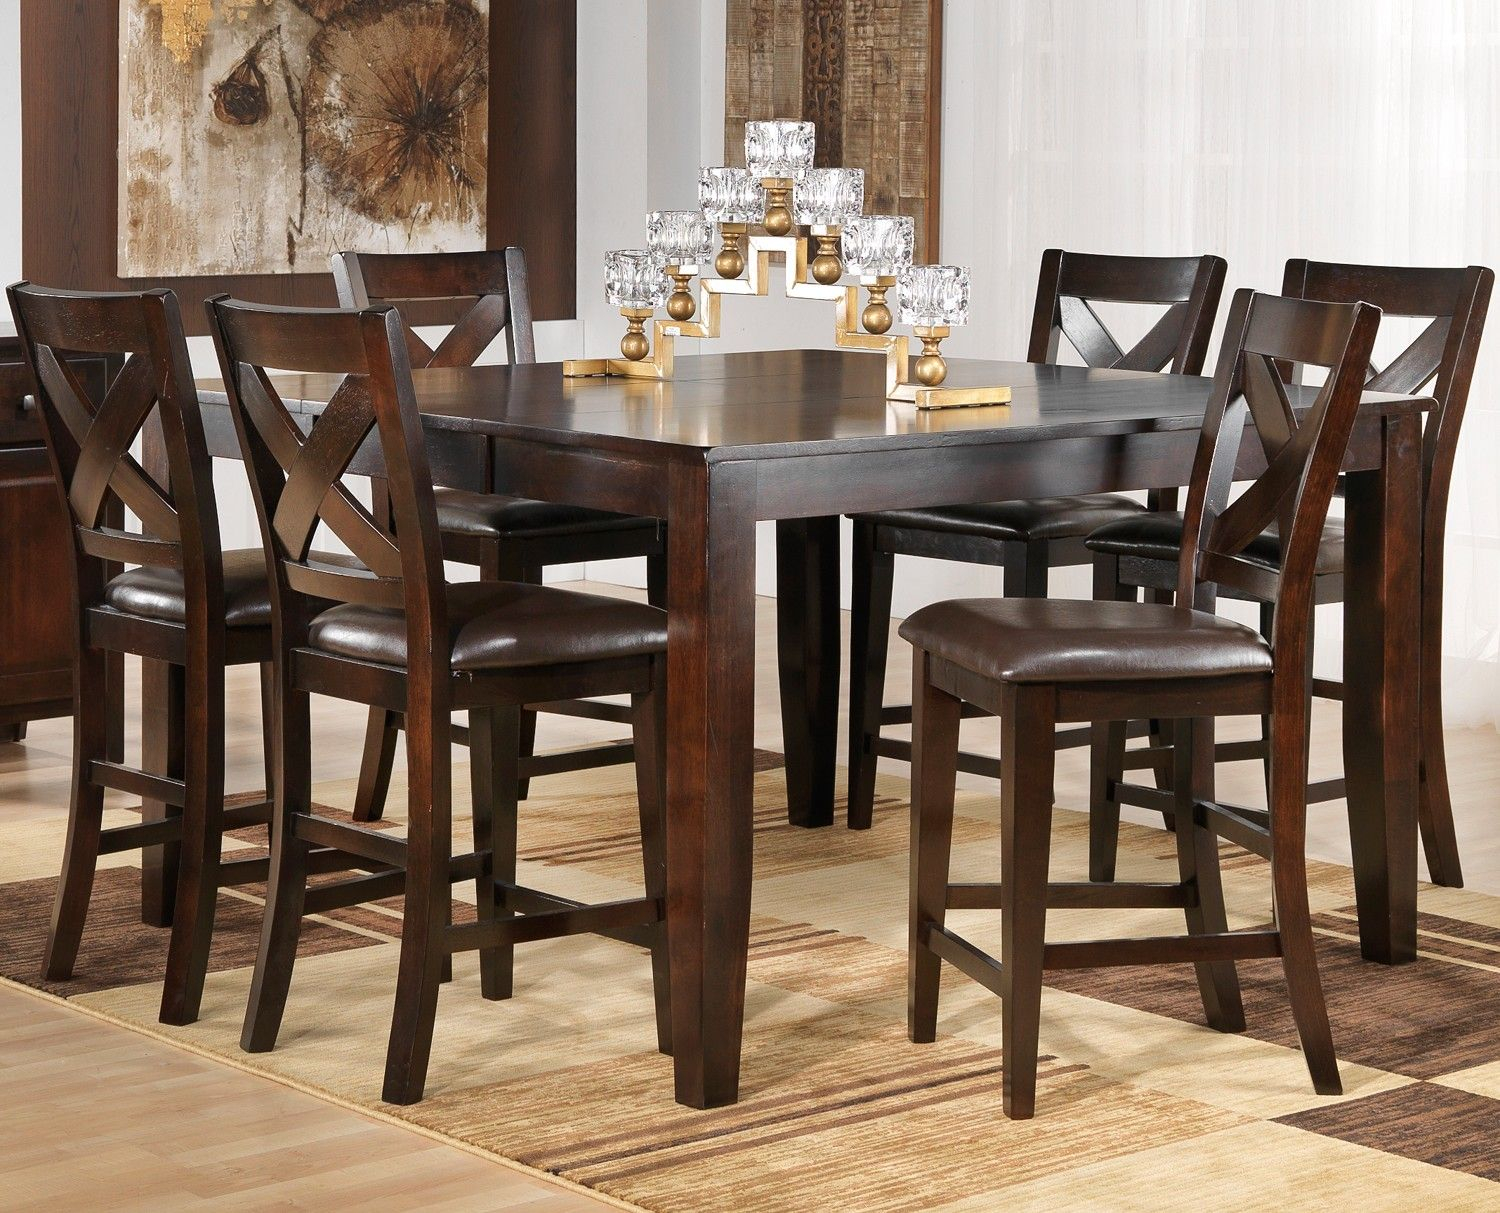 Soho Ii Dining Room 7 Pc Pub Dining Set Leons Pub with regard to proportions 1500 X 1213